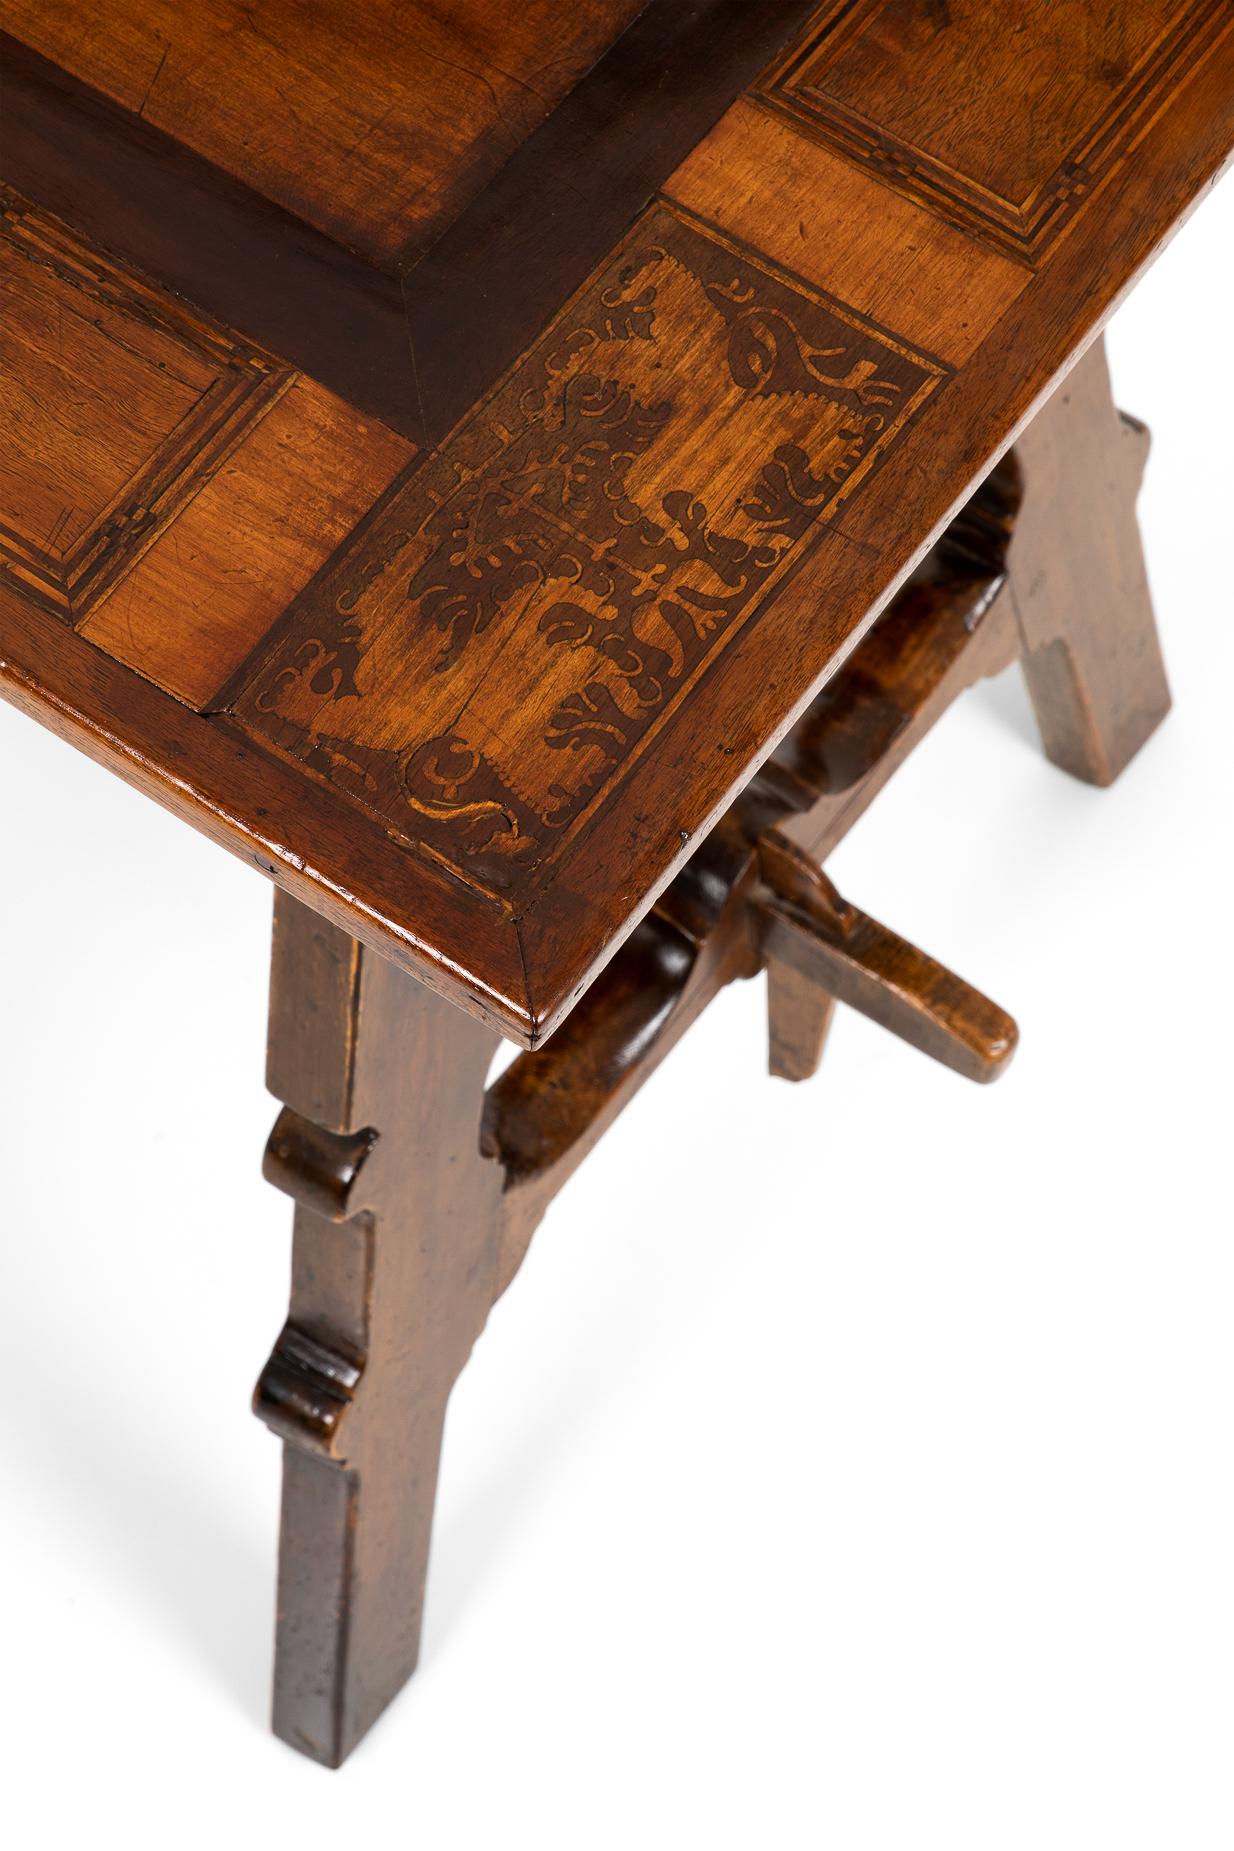 20th Century Spanish Olive Wood Table with Rectangular Top, circa 1900 For Sale